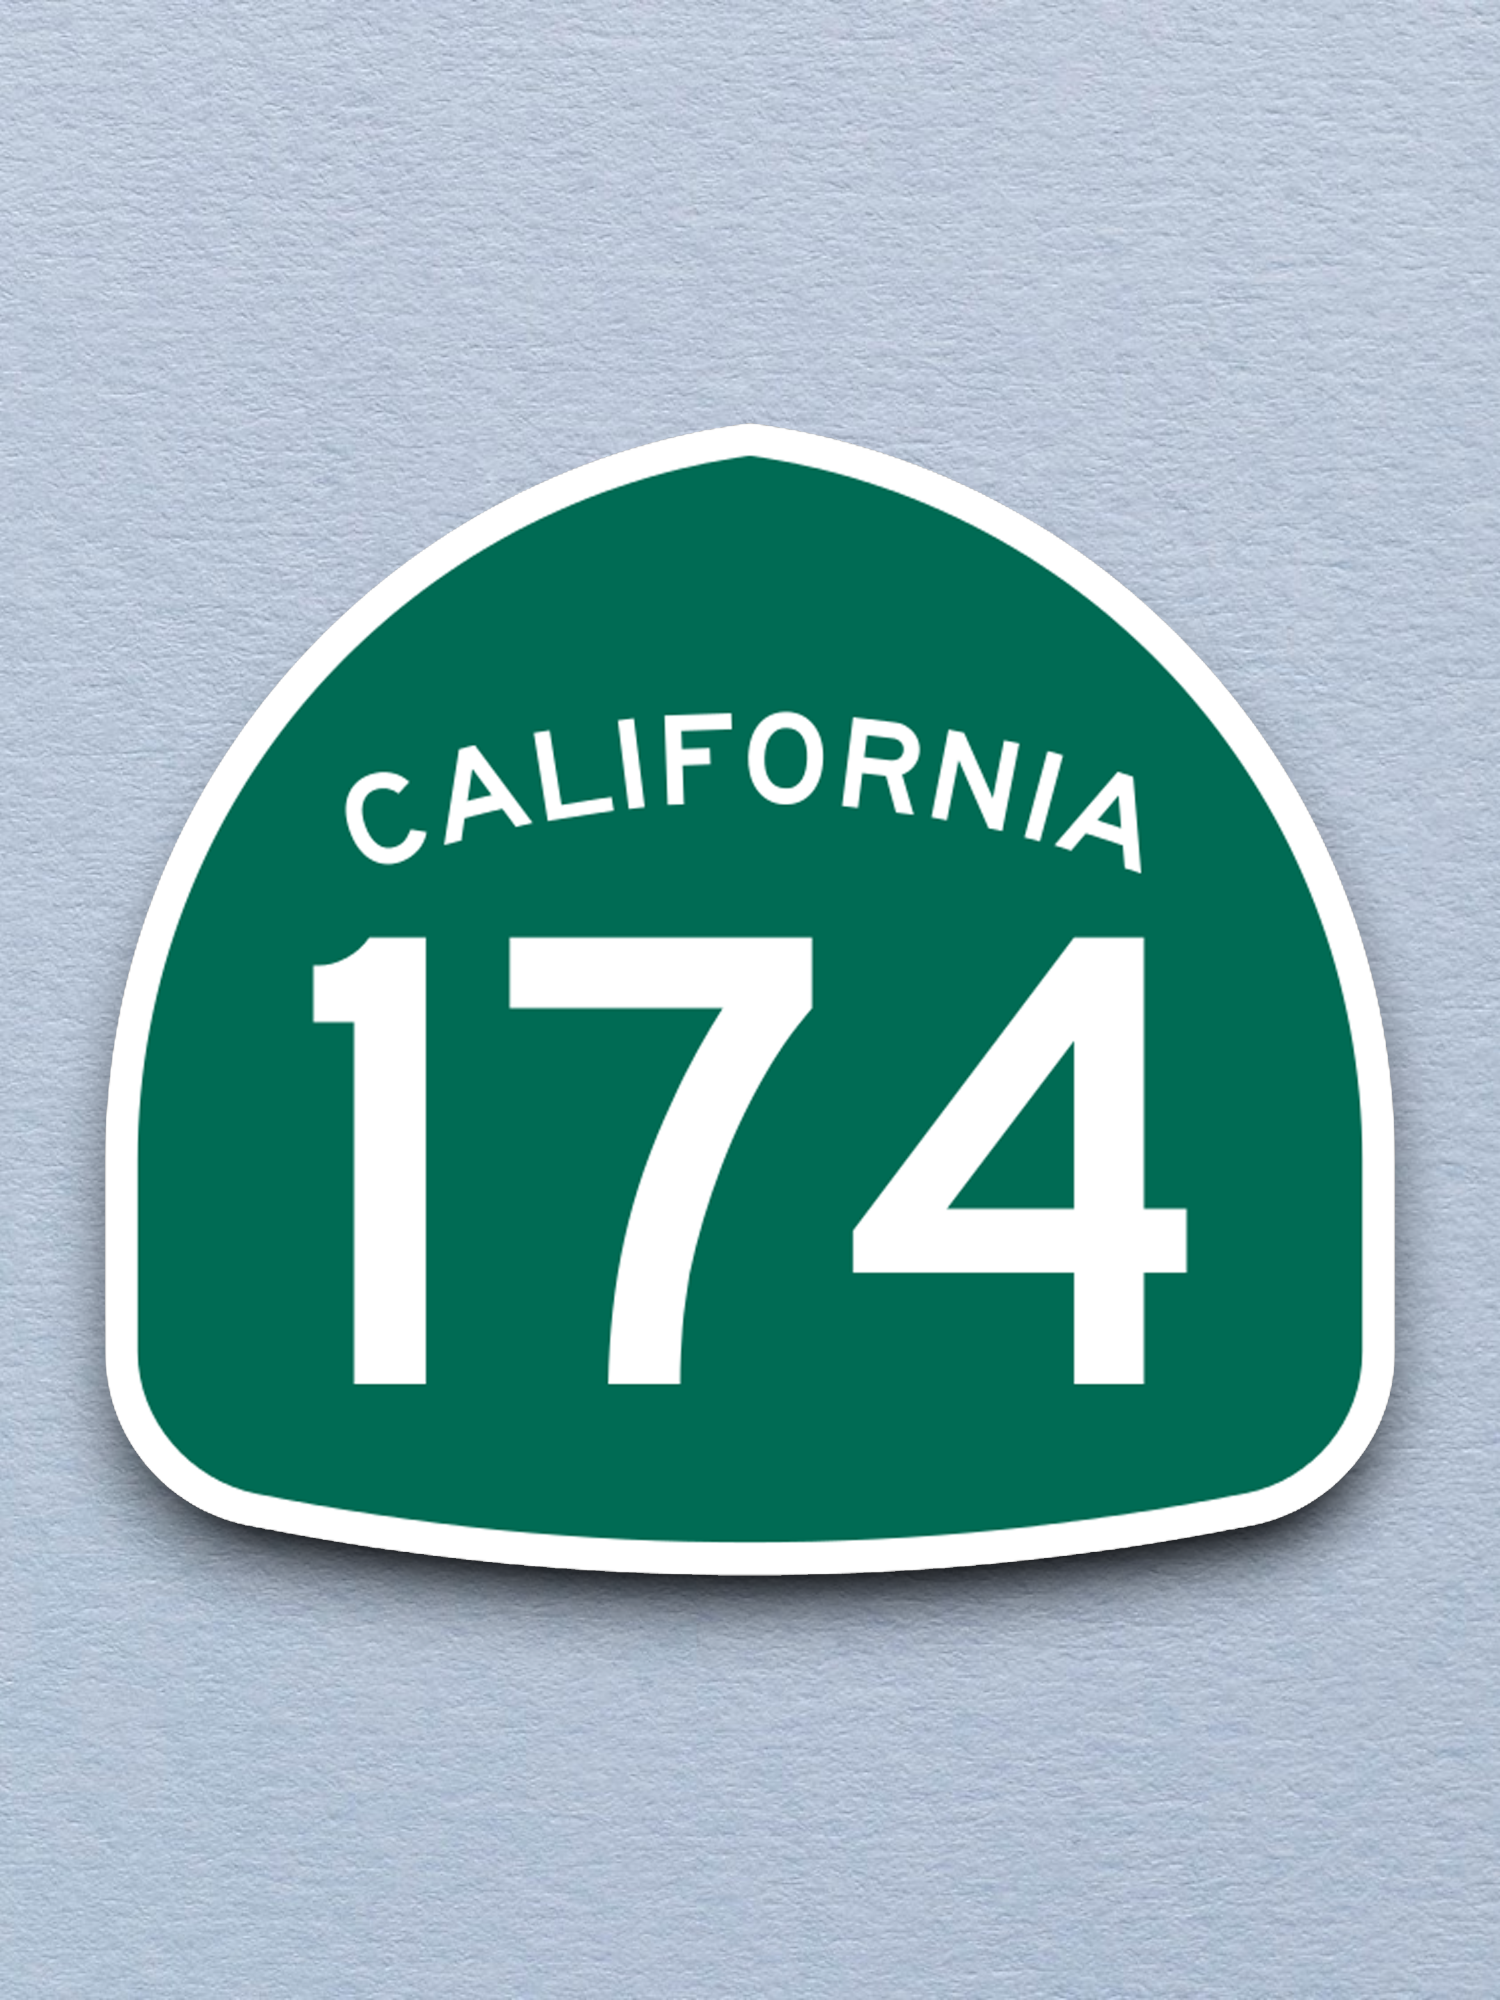 California State Route 174 Road Sign Sticker